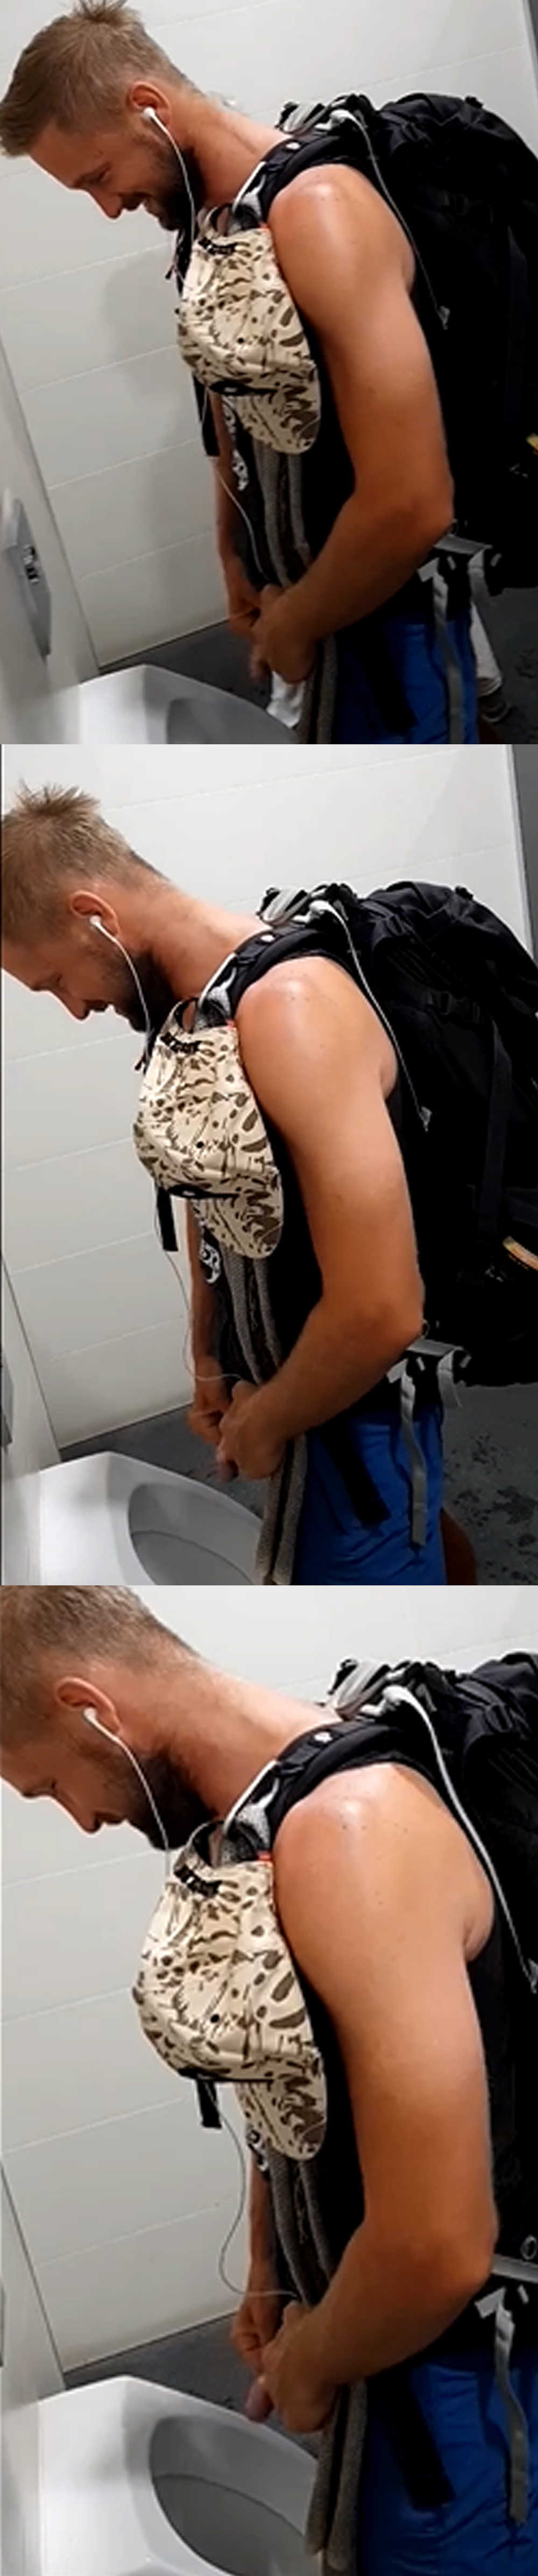 german guy caught peeing at airport urinals by spycam